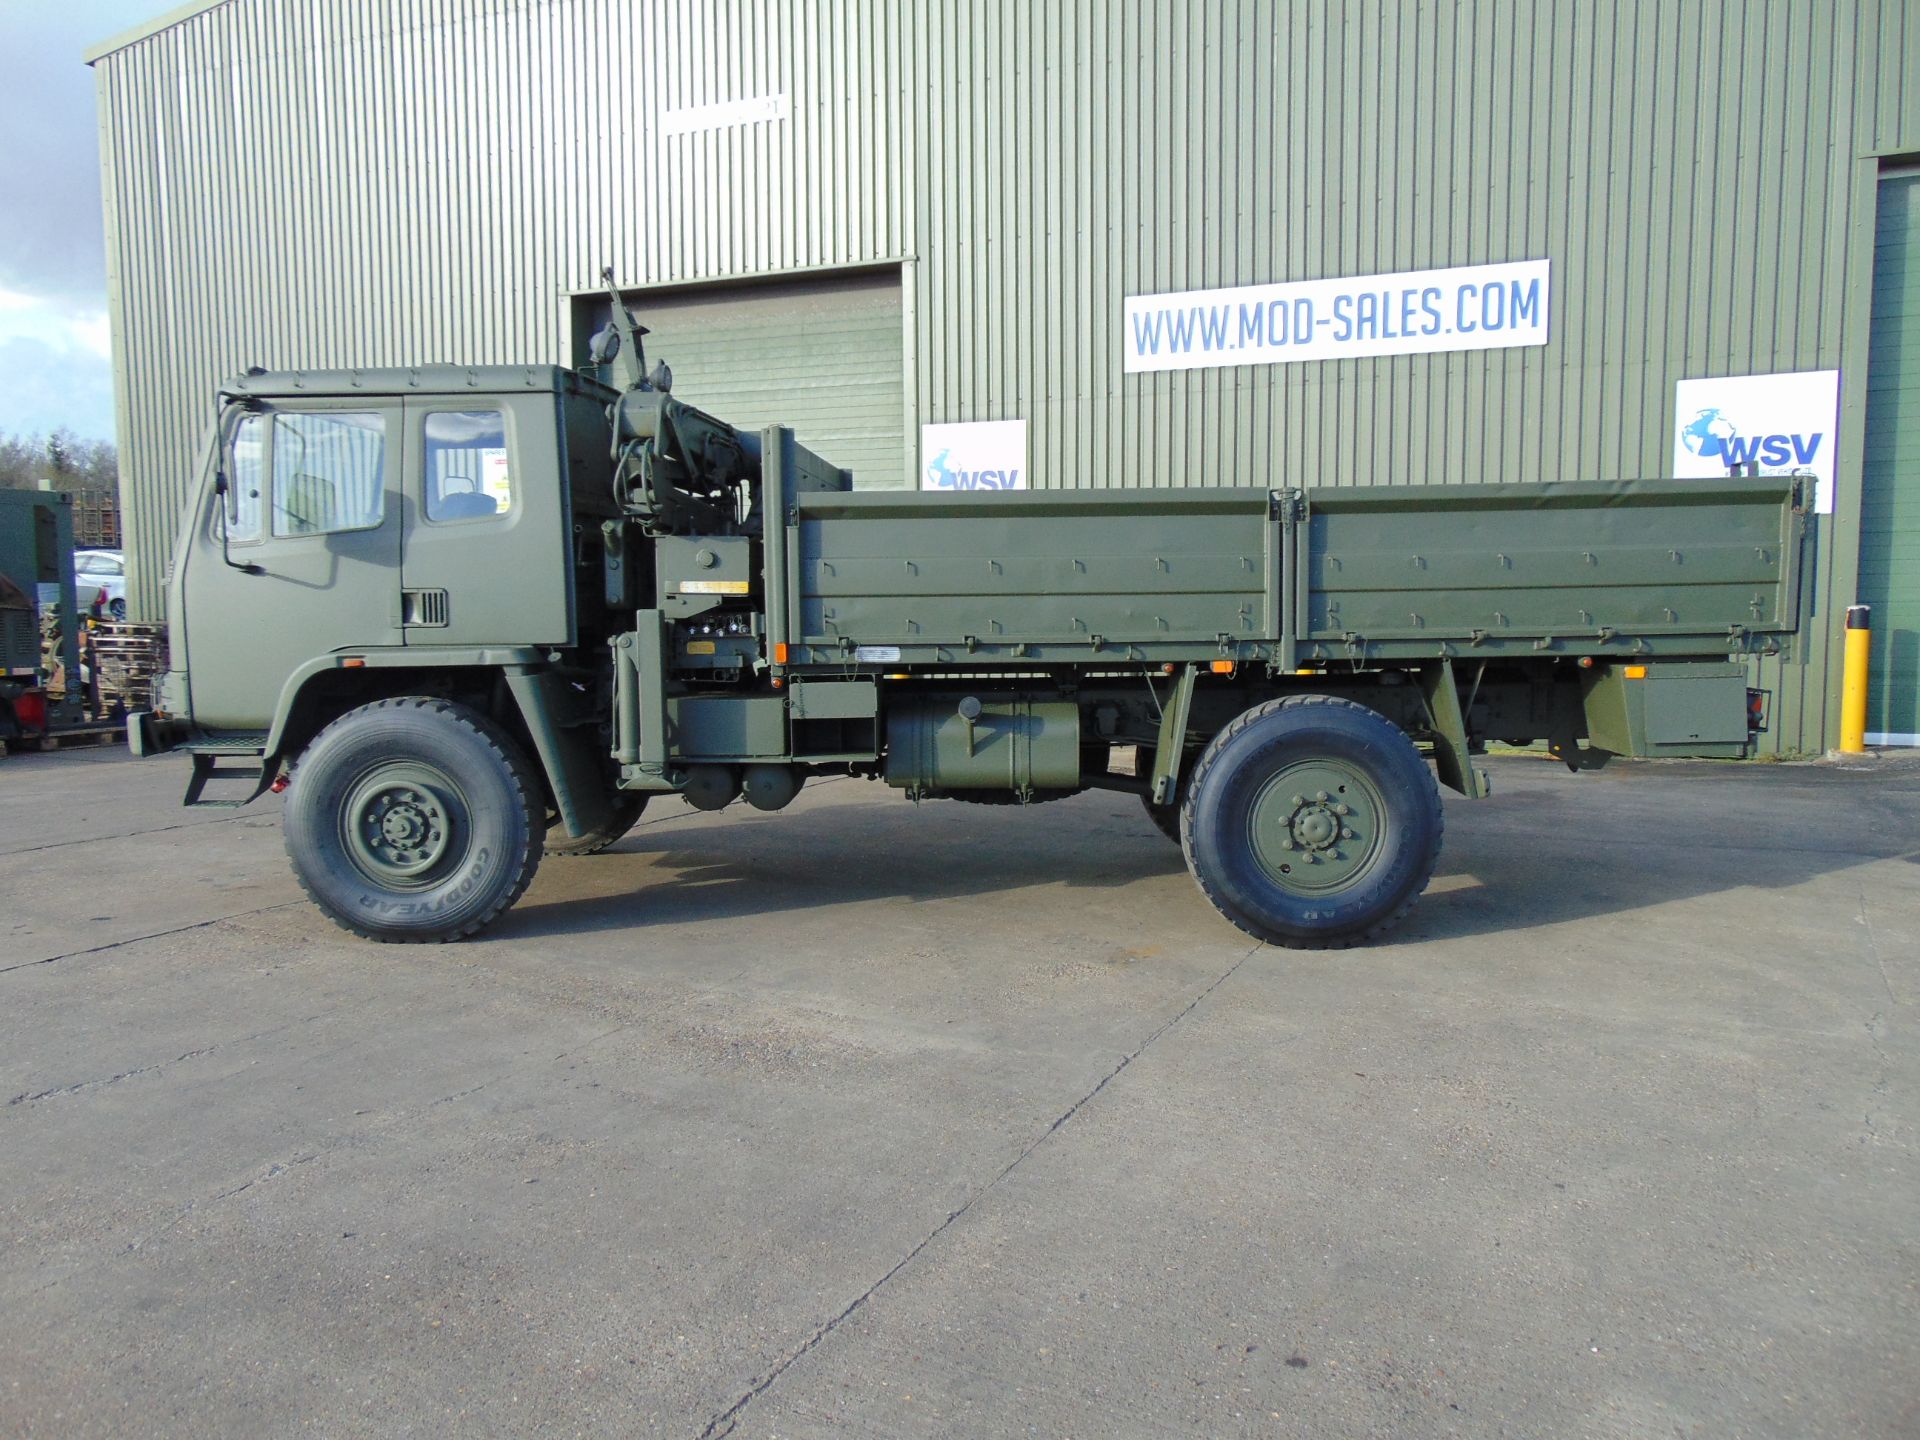 Leyland DAF 4X4 Truck complete with Atlas Crane - Image 36 of 36